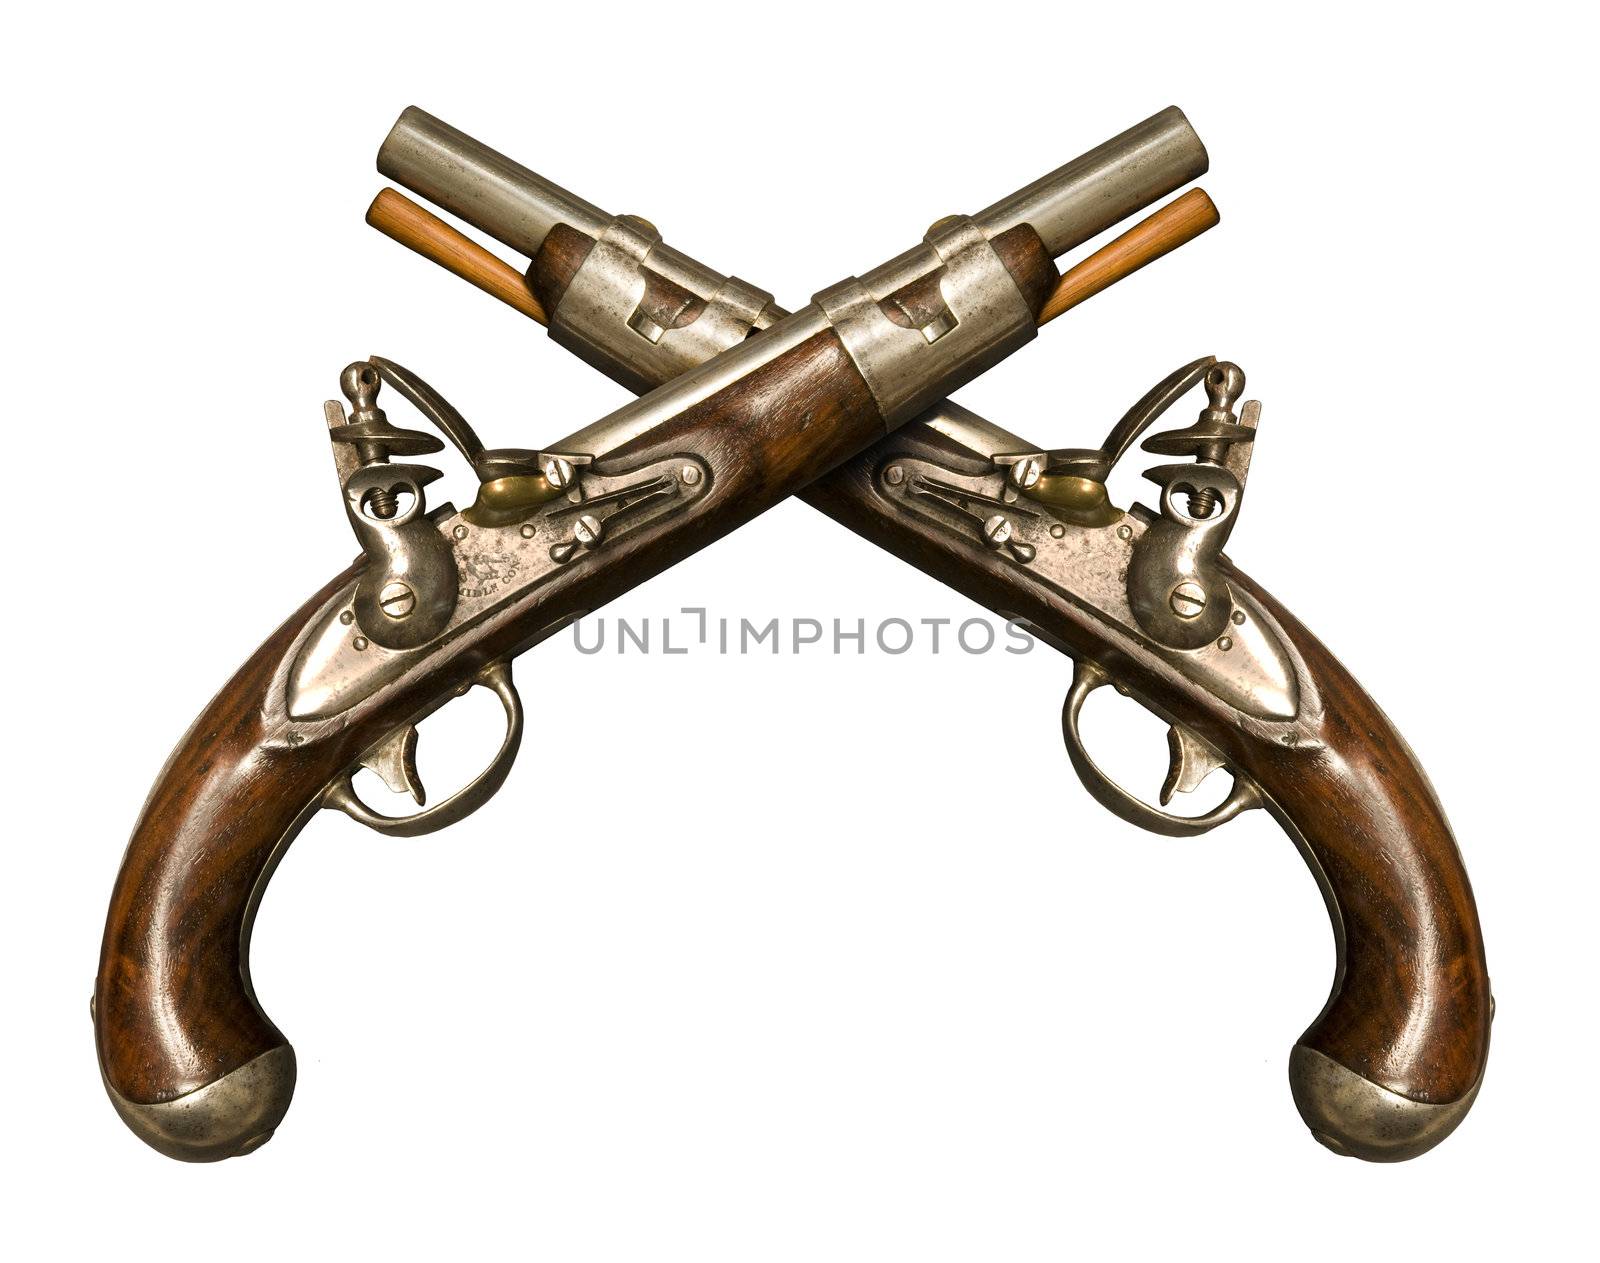 Two Crossed Flintlock Pistols against white background. Flintlock pistols manufactured by gunmaker Simeon North circa 1813, although it is similar to what was used during the American Revolution. It was one of the few flintlocks made in the United States in that era. It was also notable in that it had interchangeable parts.